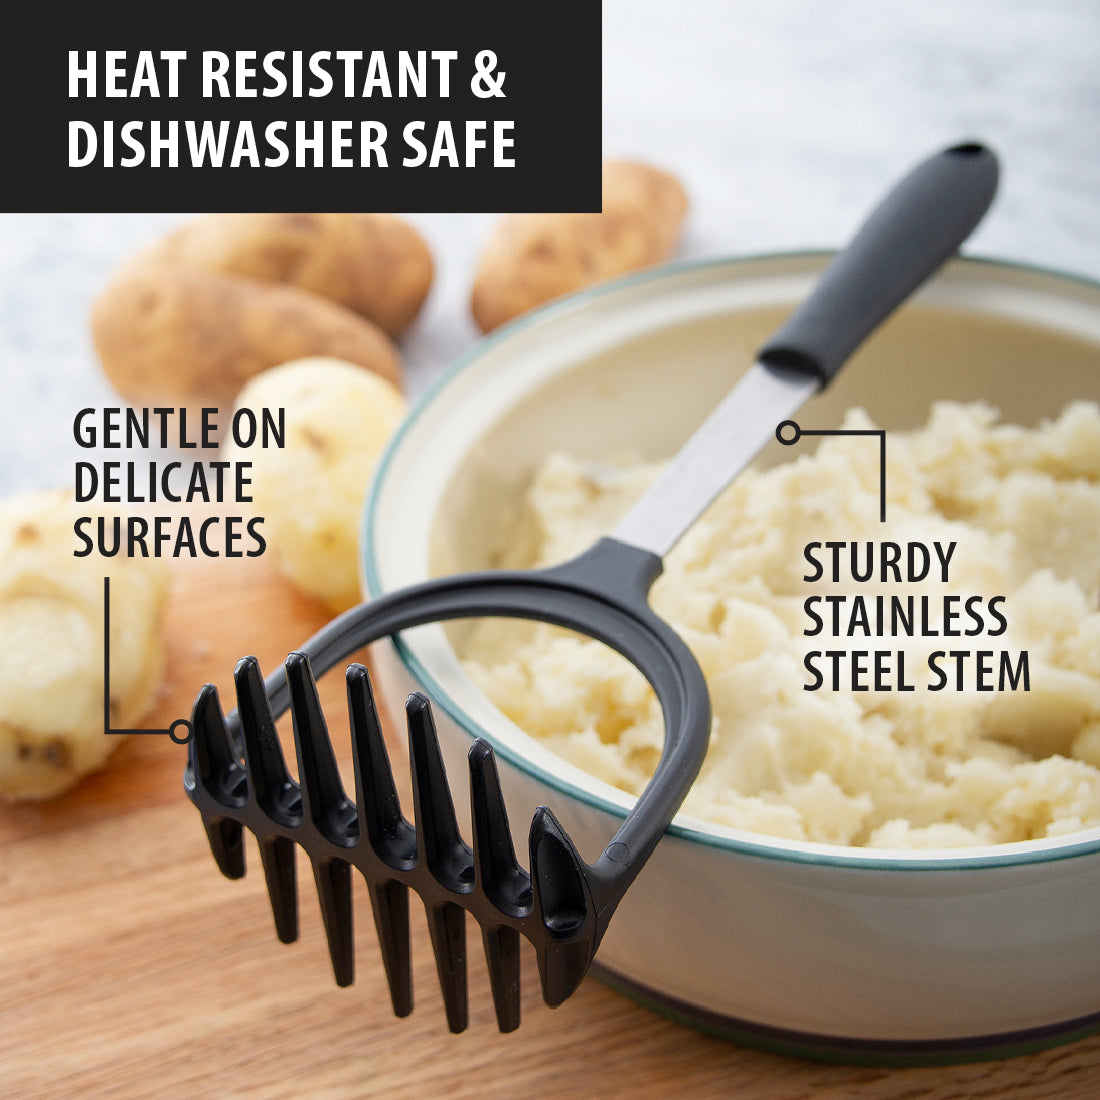 Why You Should Break Out The Potato Masher The Next Time You